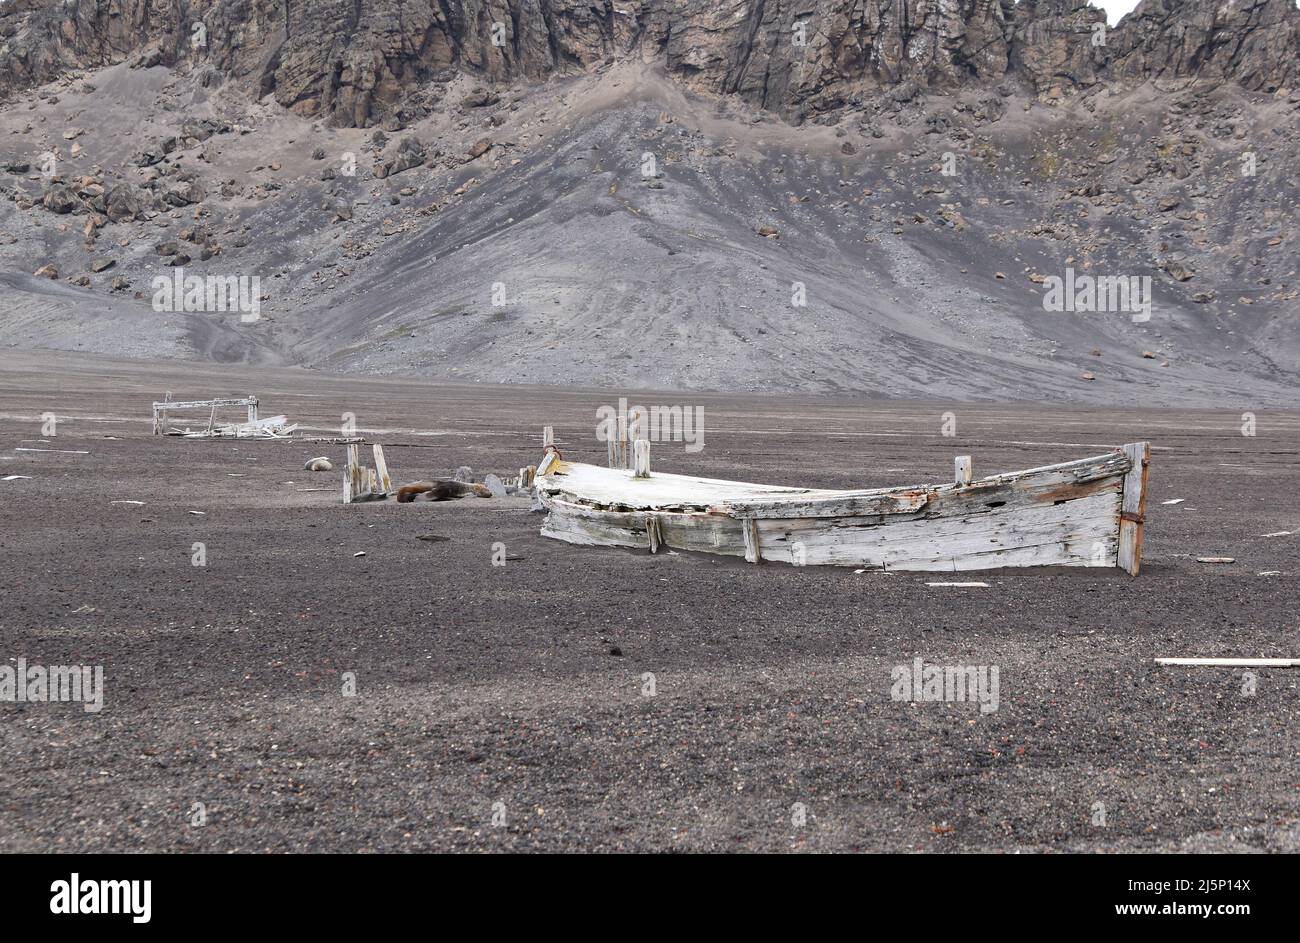 remains of old wooden boat at Deception Island, Antarctica Stock Photo